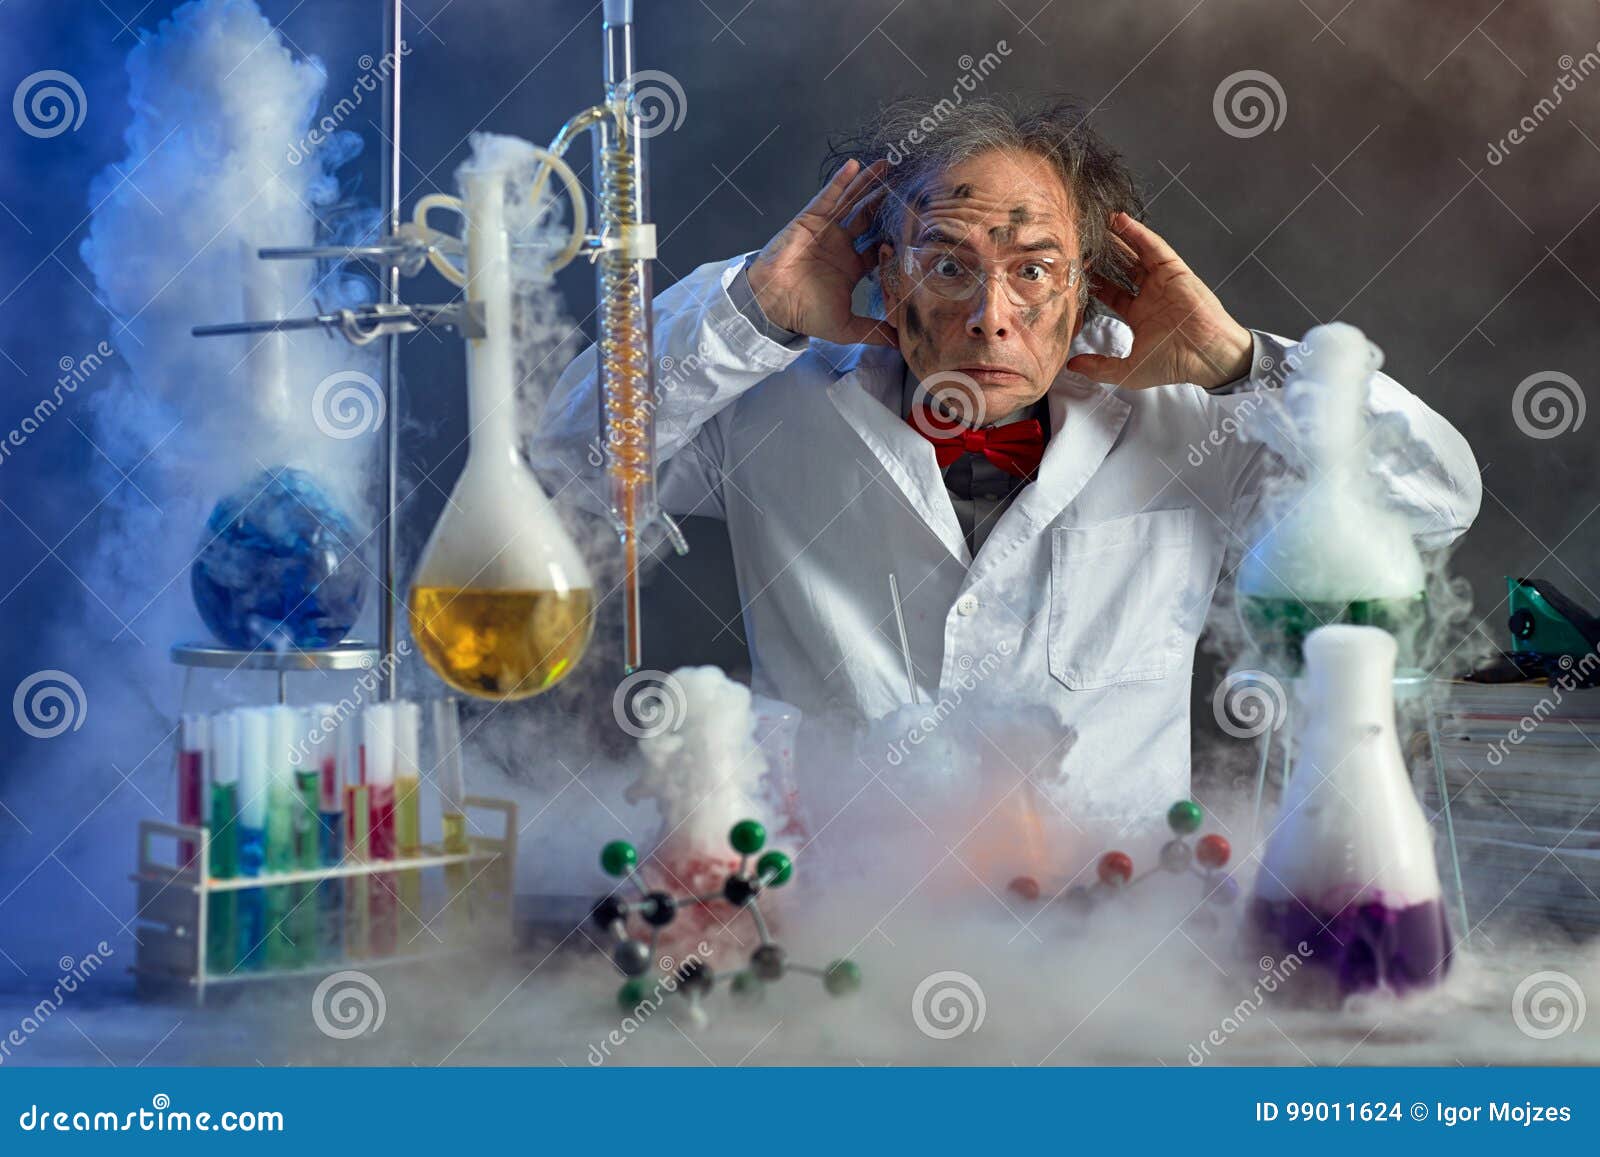 frightened scientist front of experiment that exploded